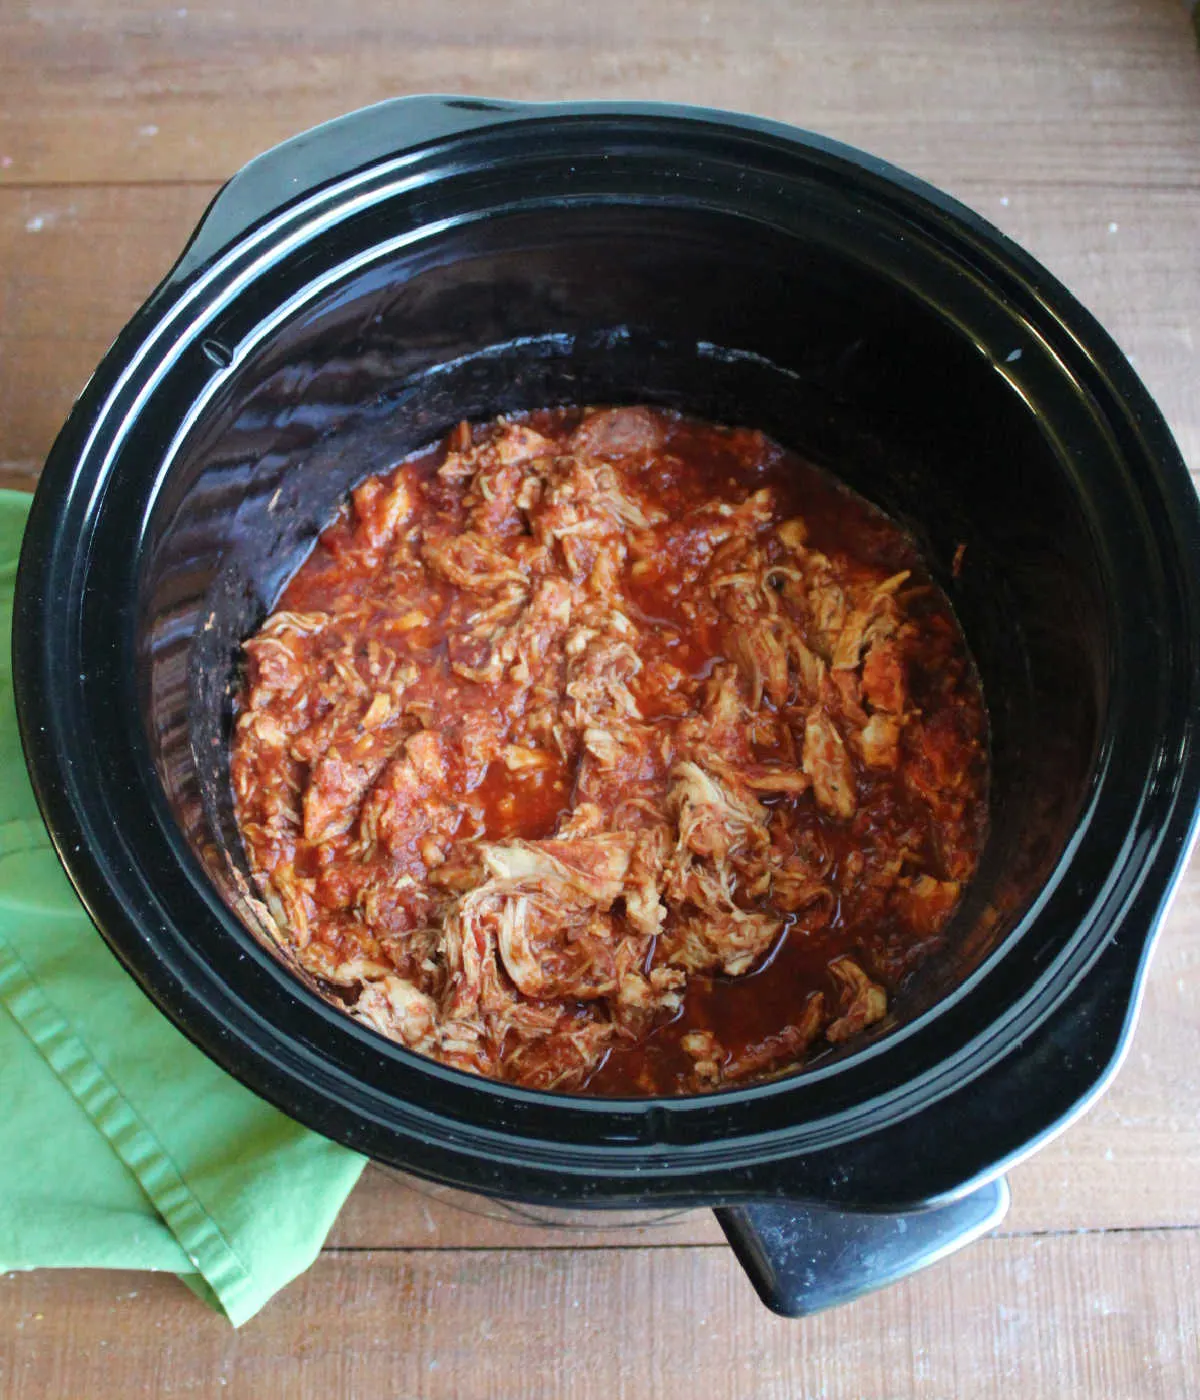 Shredded chicken and marinara in slow cooker ready to be made into sandwiches.